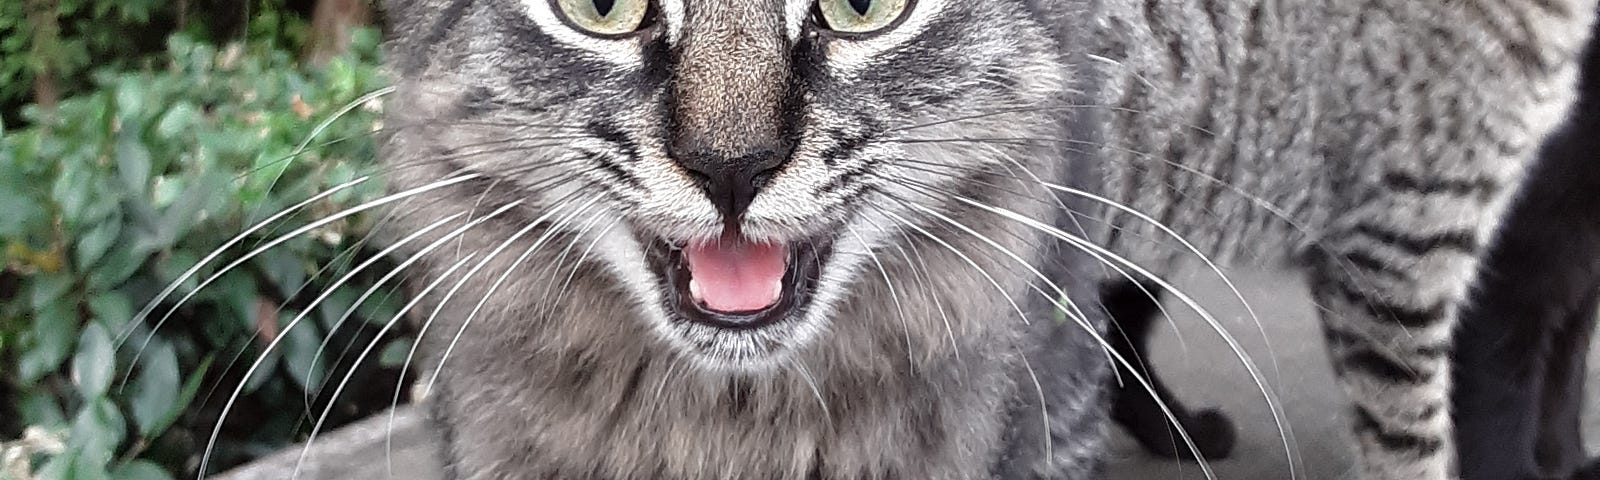 Wild-looking, beautiful, light and dark gray striped feral cat looking at the camera, mouth open, pink tongued and other siblings in the background